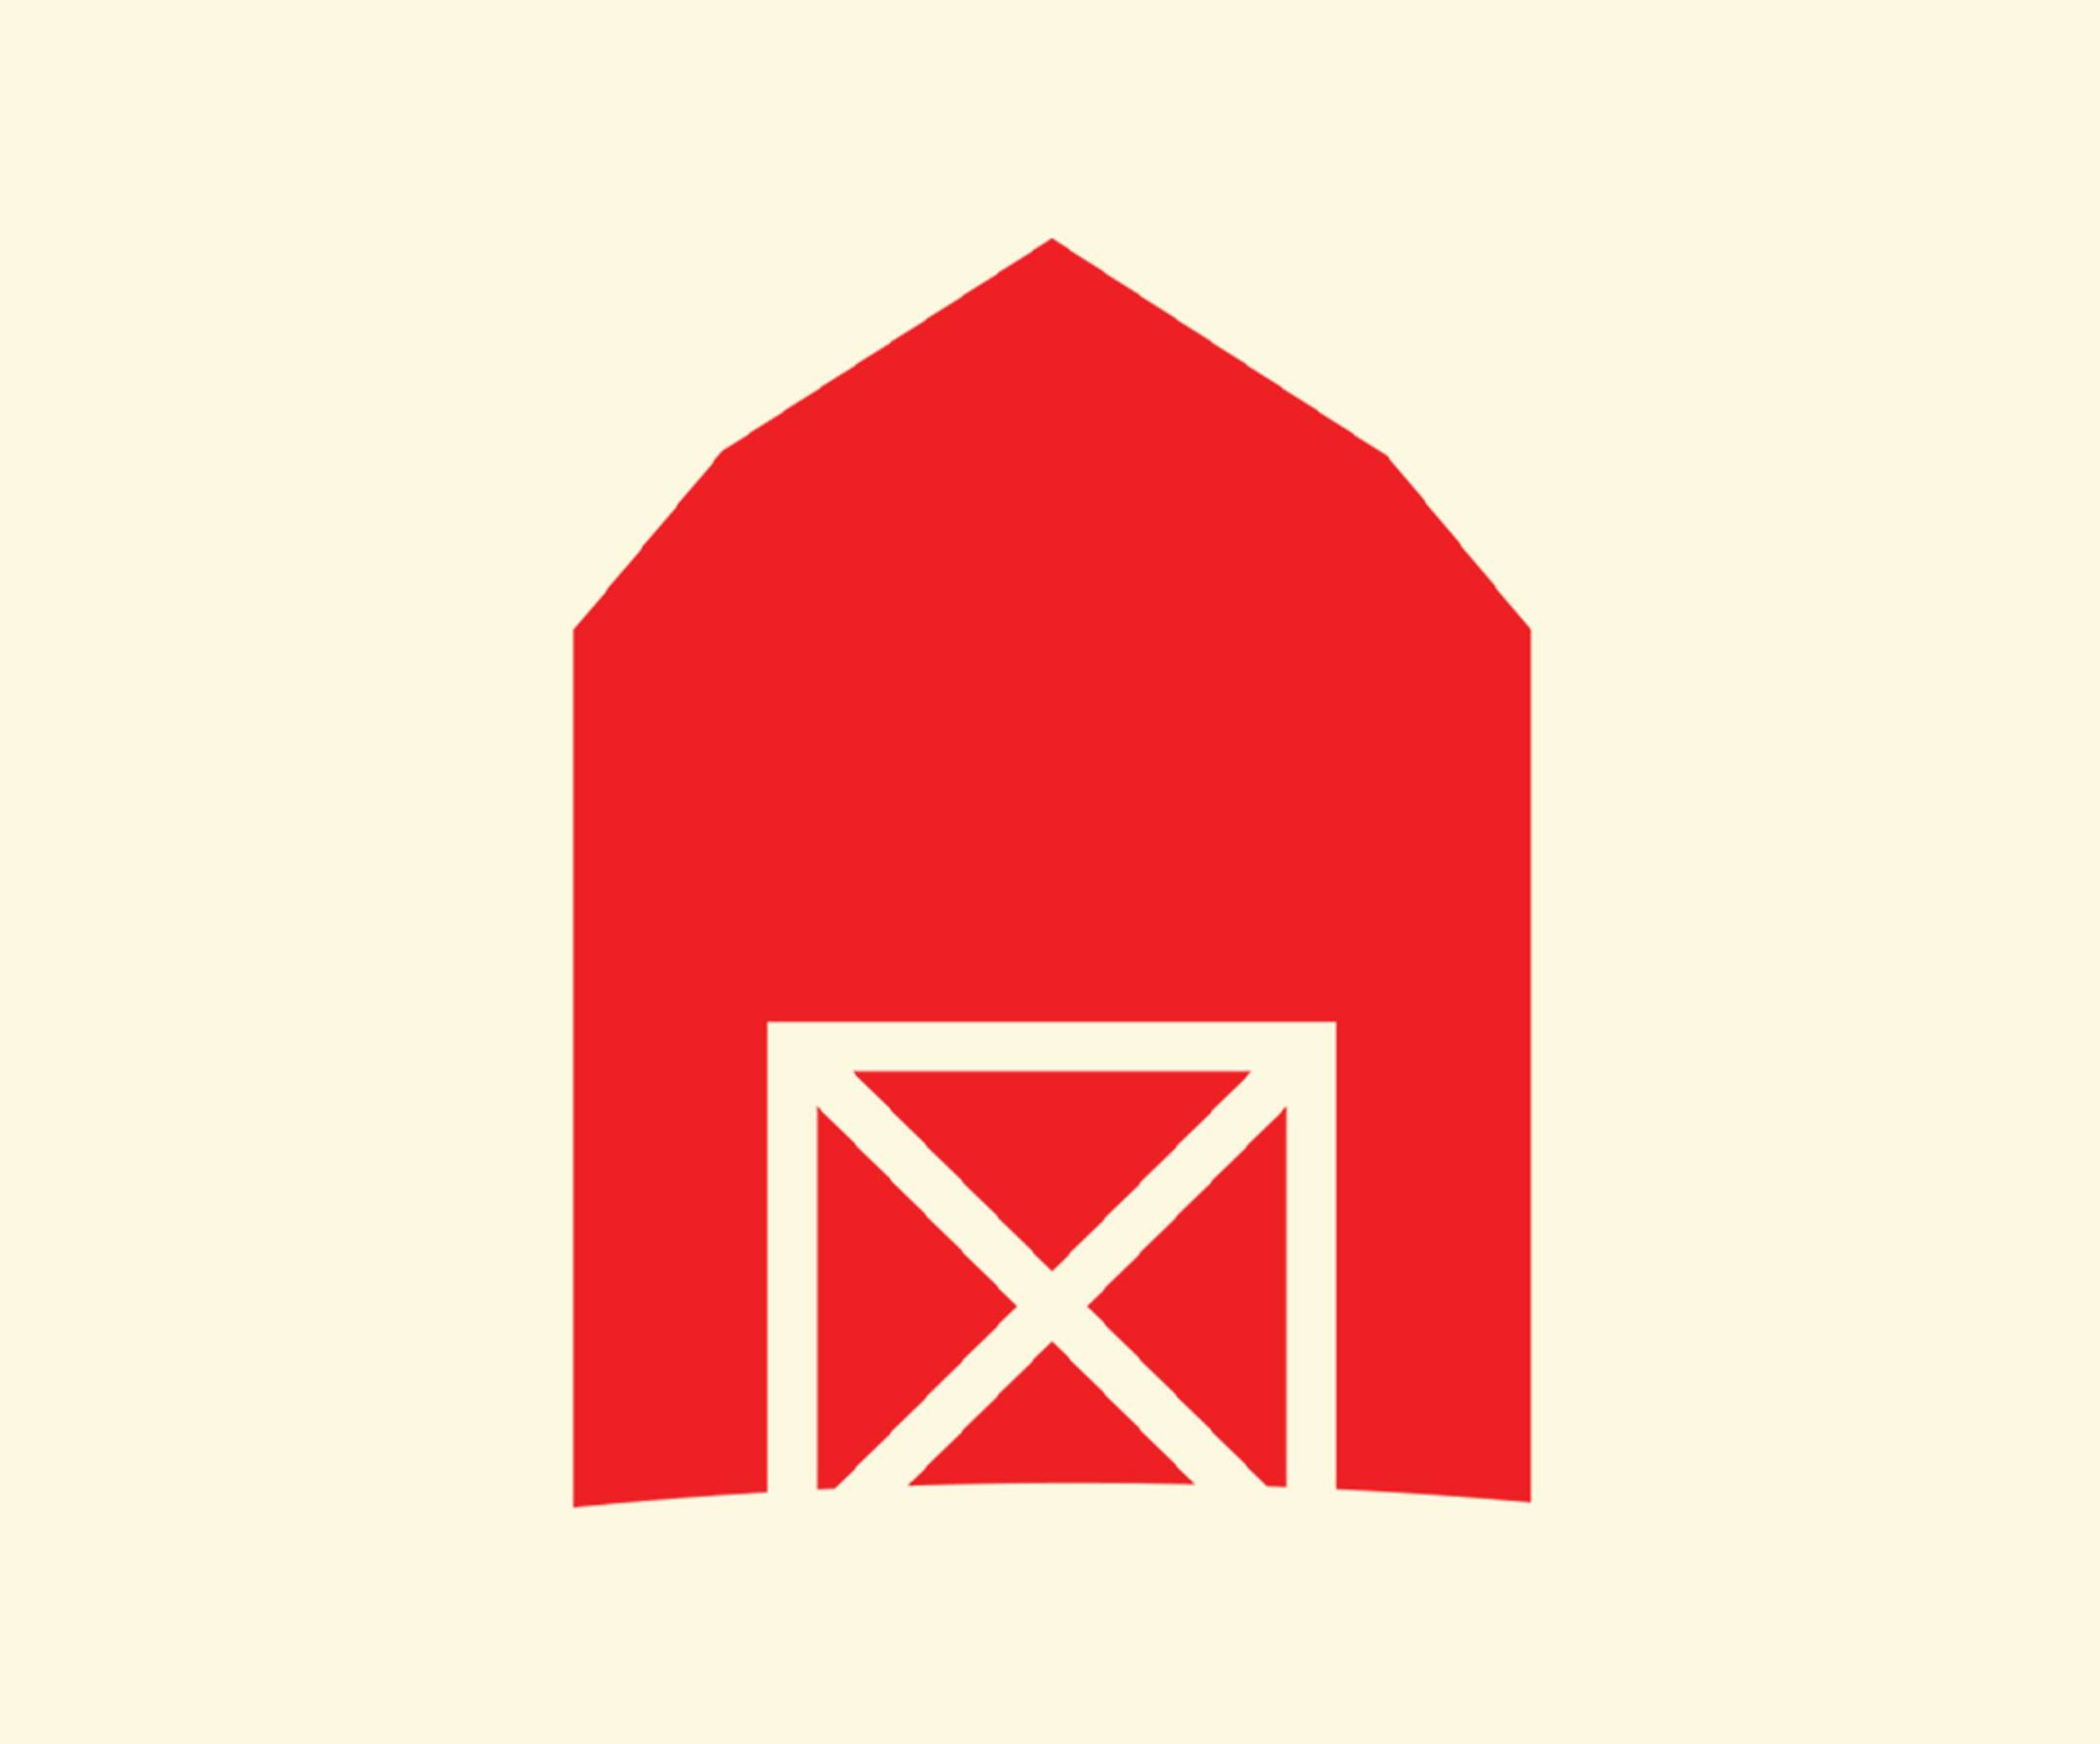 illustration of a red barn on a cream-colored background